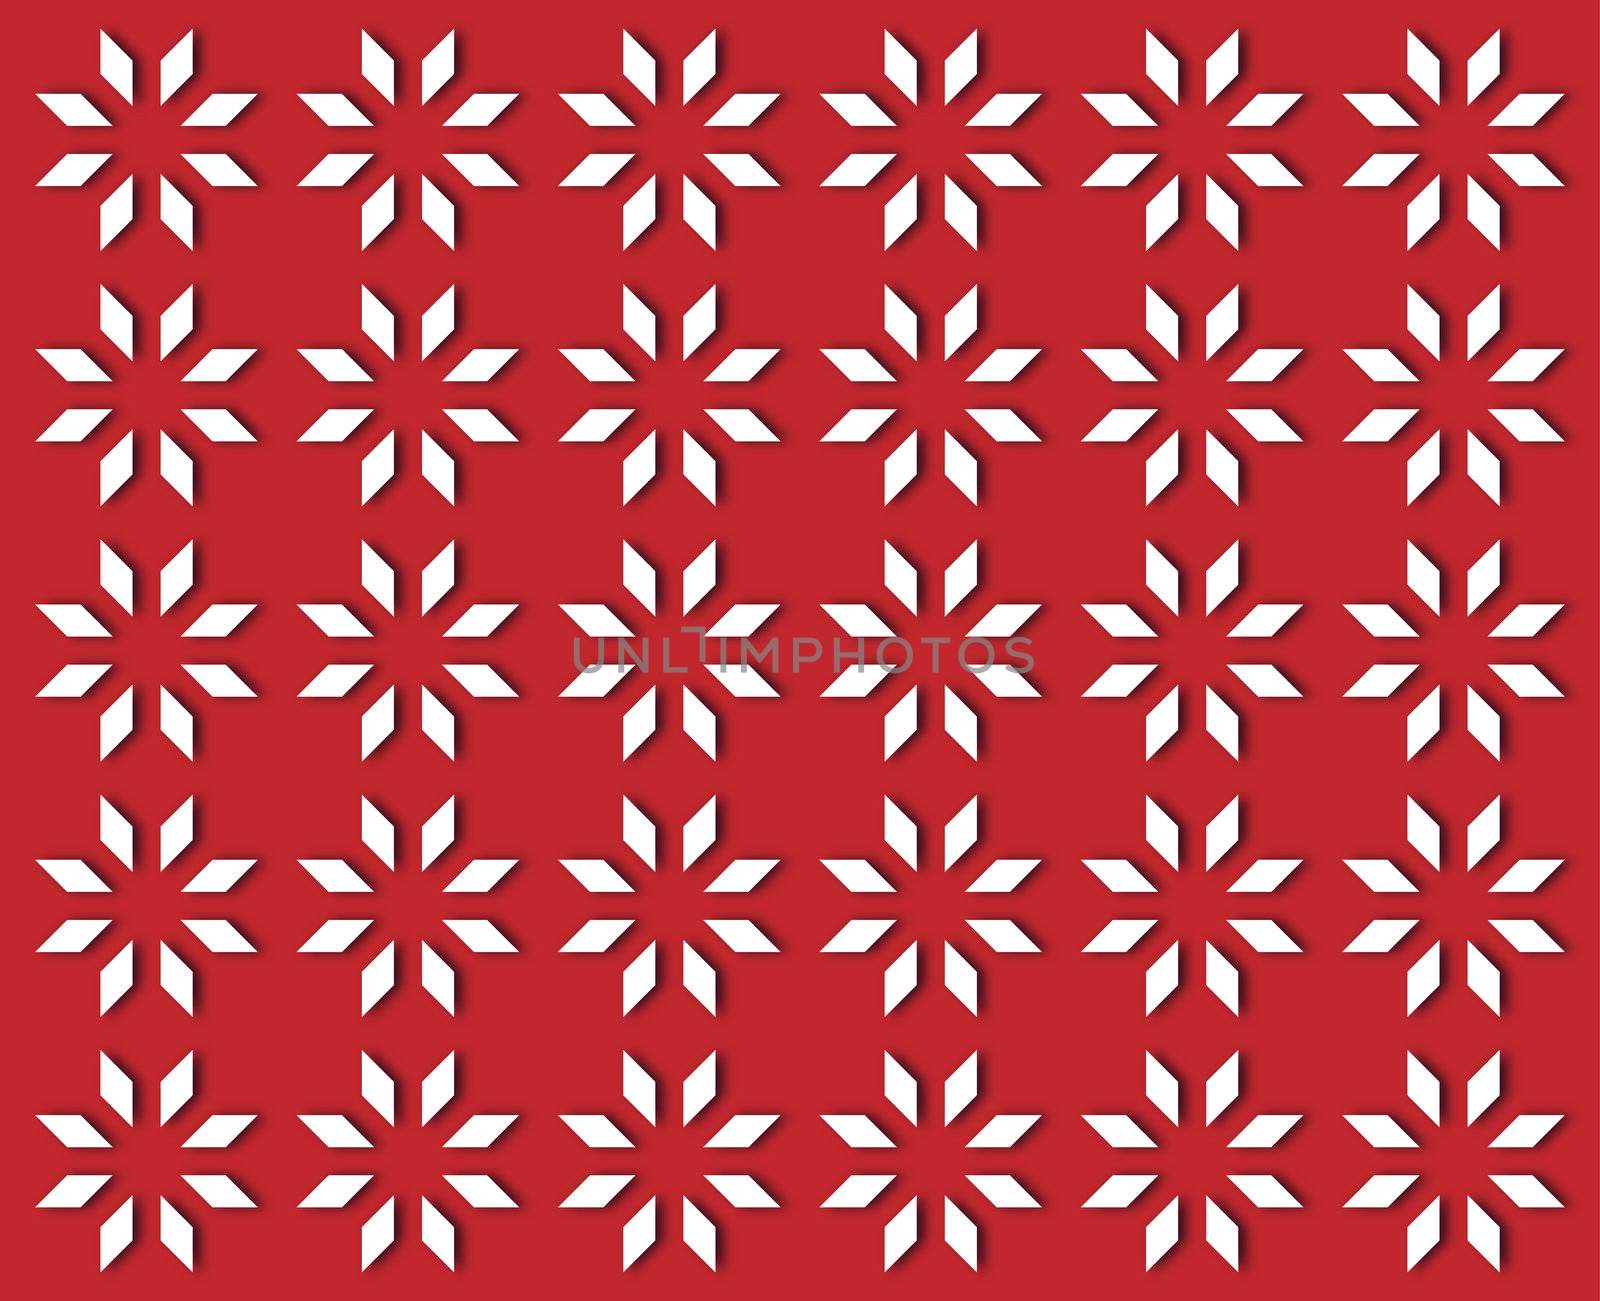 Christmas red background with white stylized snowflakes